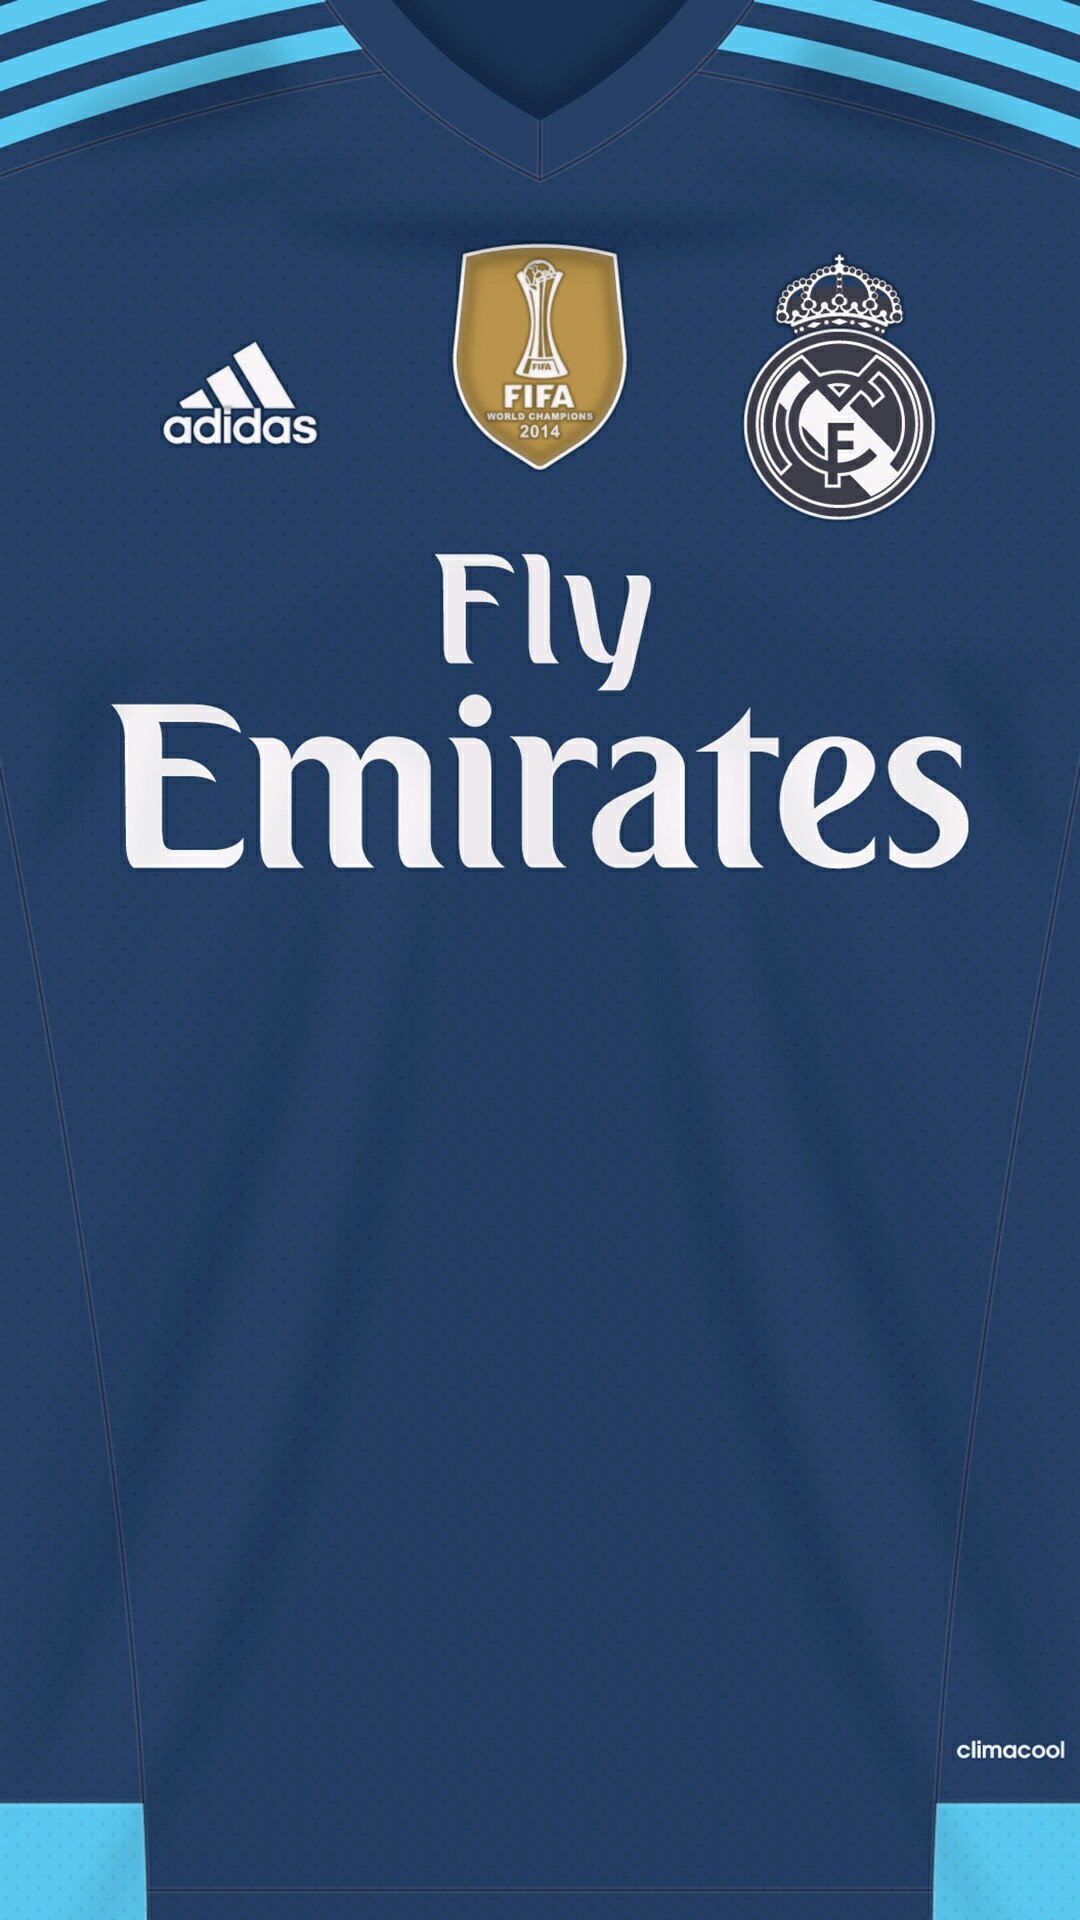 Real Madrid Wallpaper 2018 72 Images